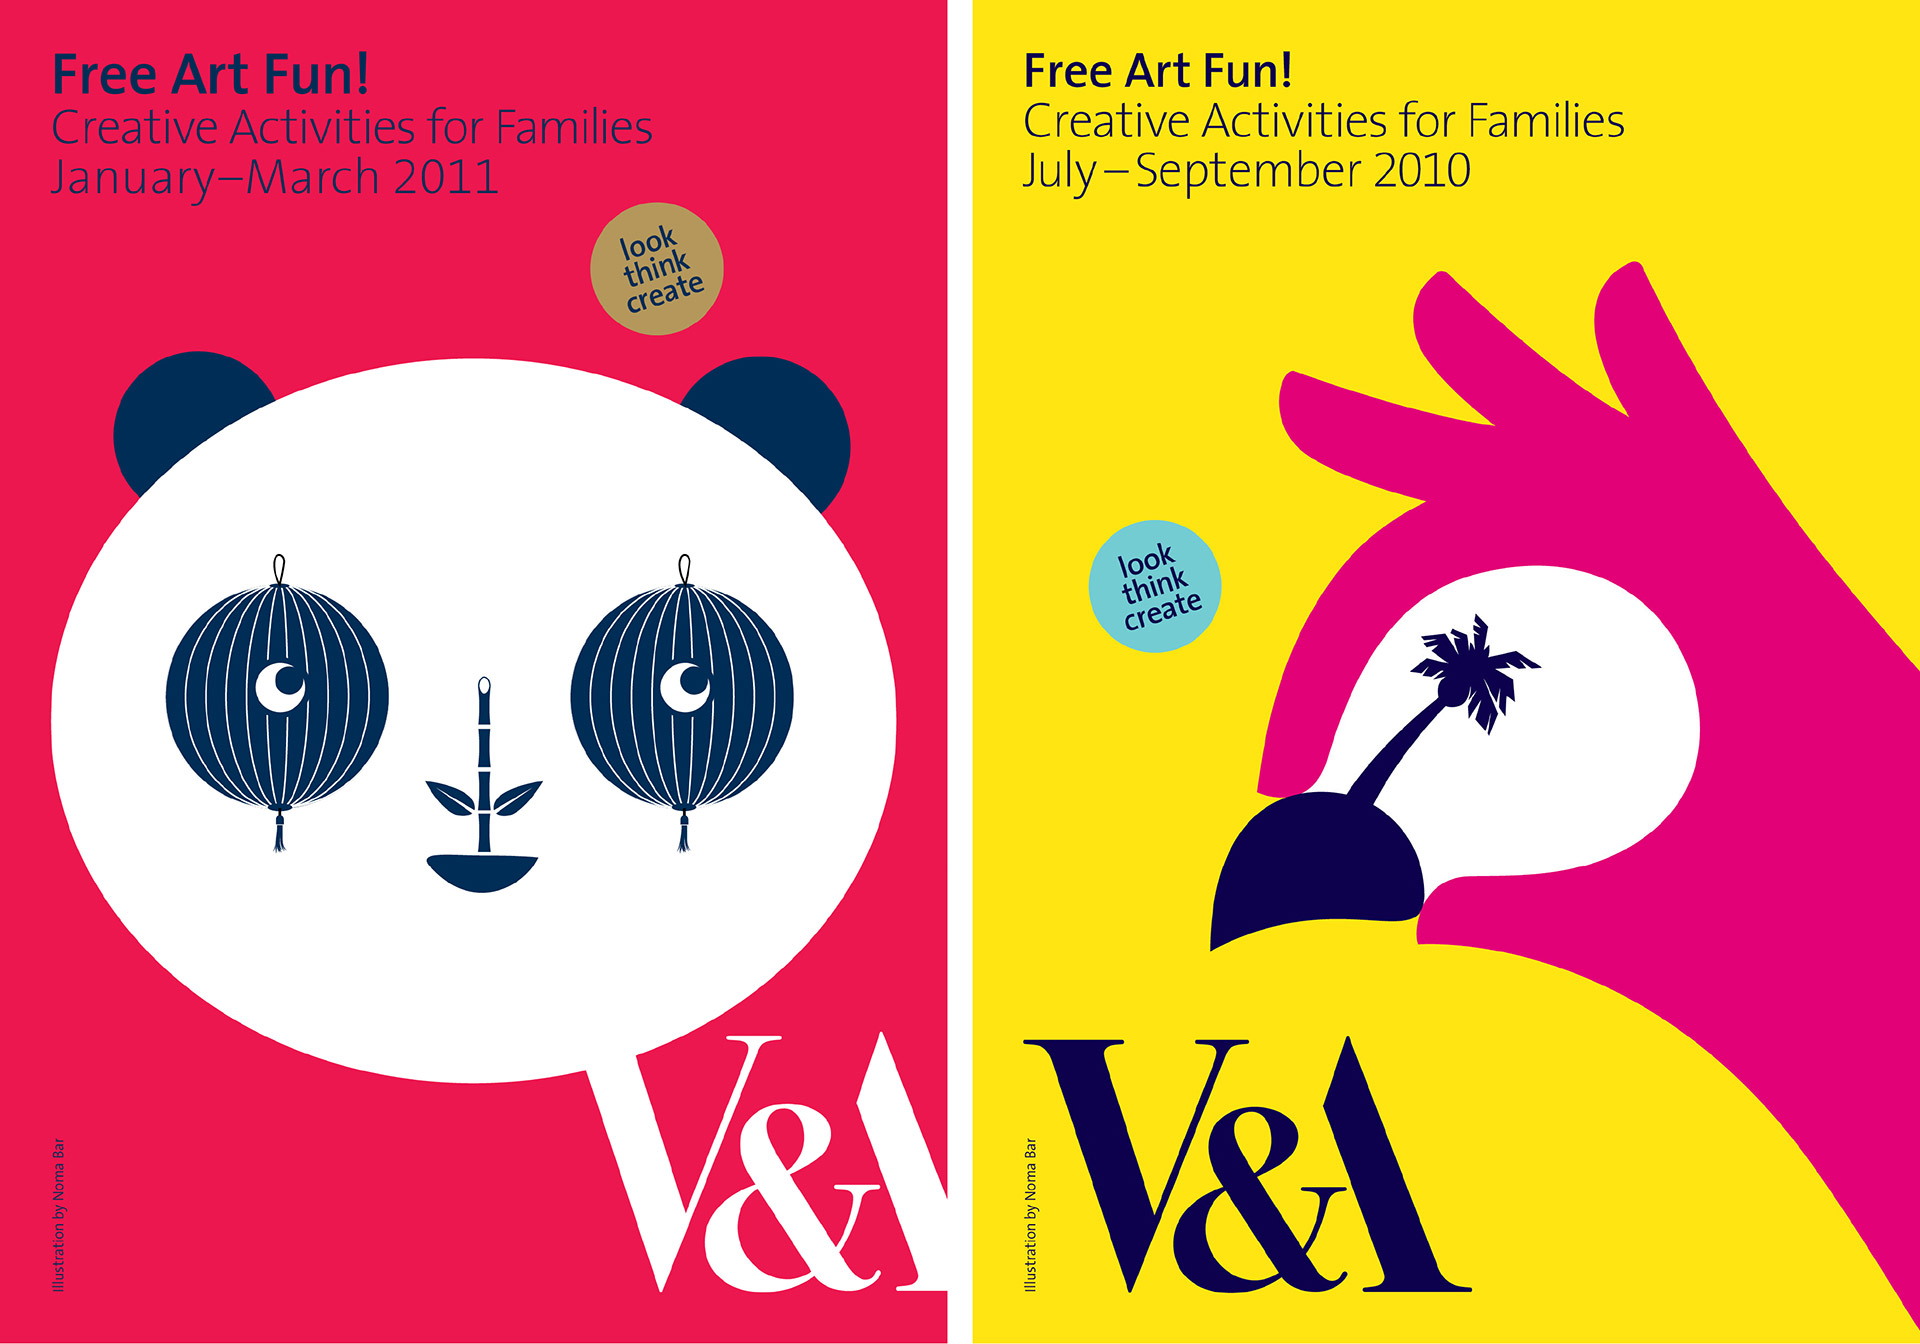 Learning and Interpretation campaign identity for V&A South Kensington designed by Irish Butcher